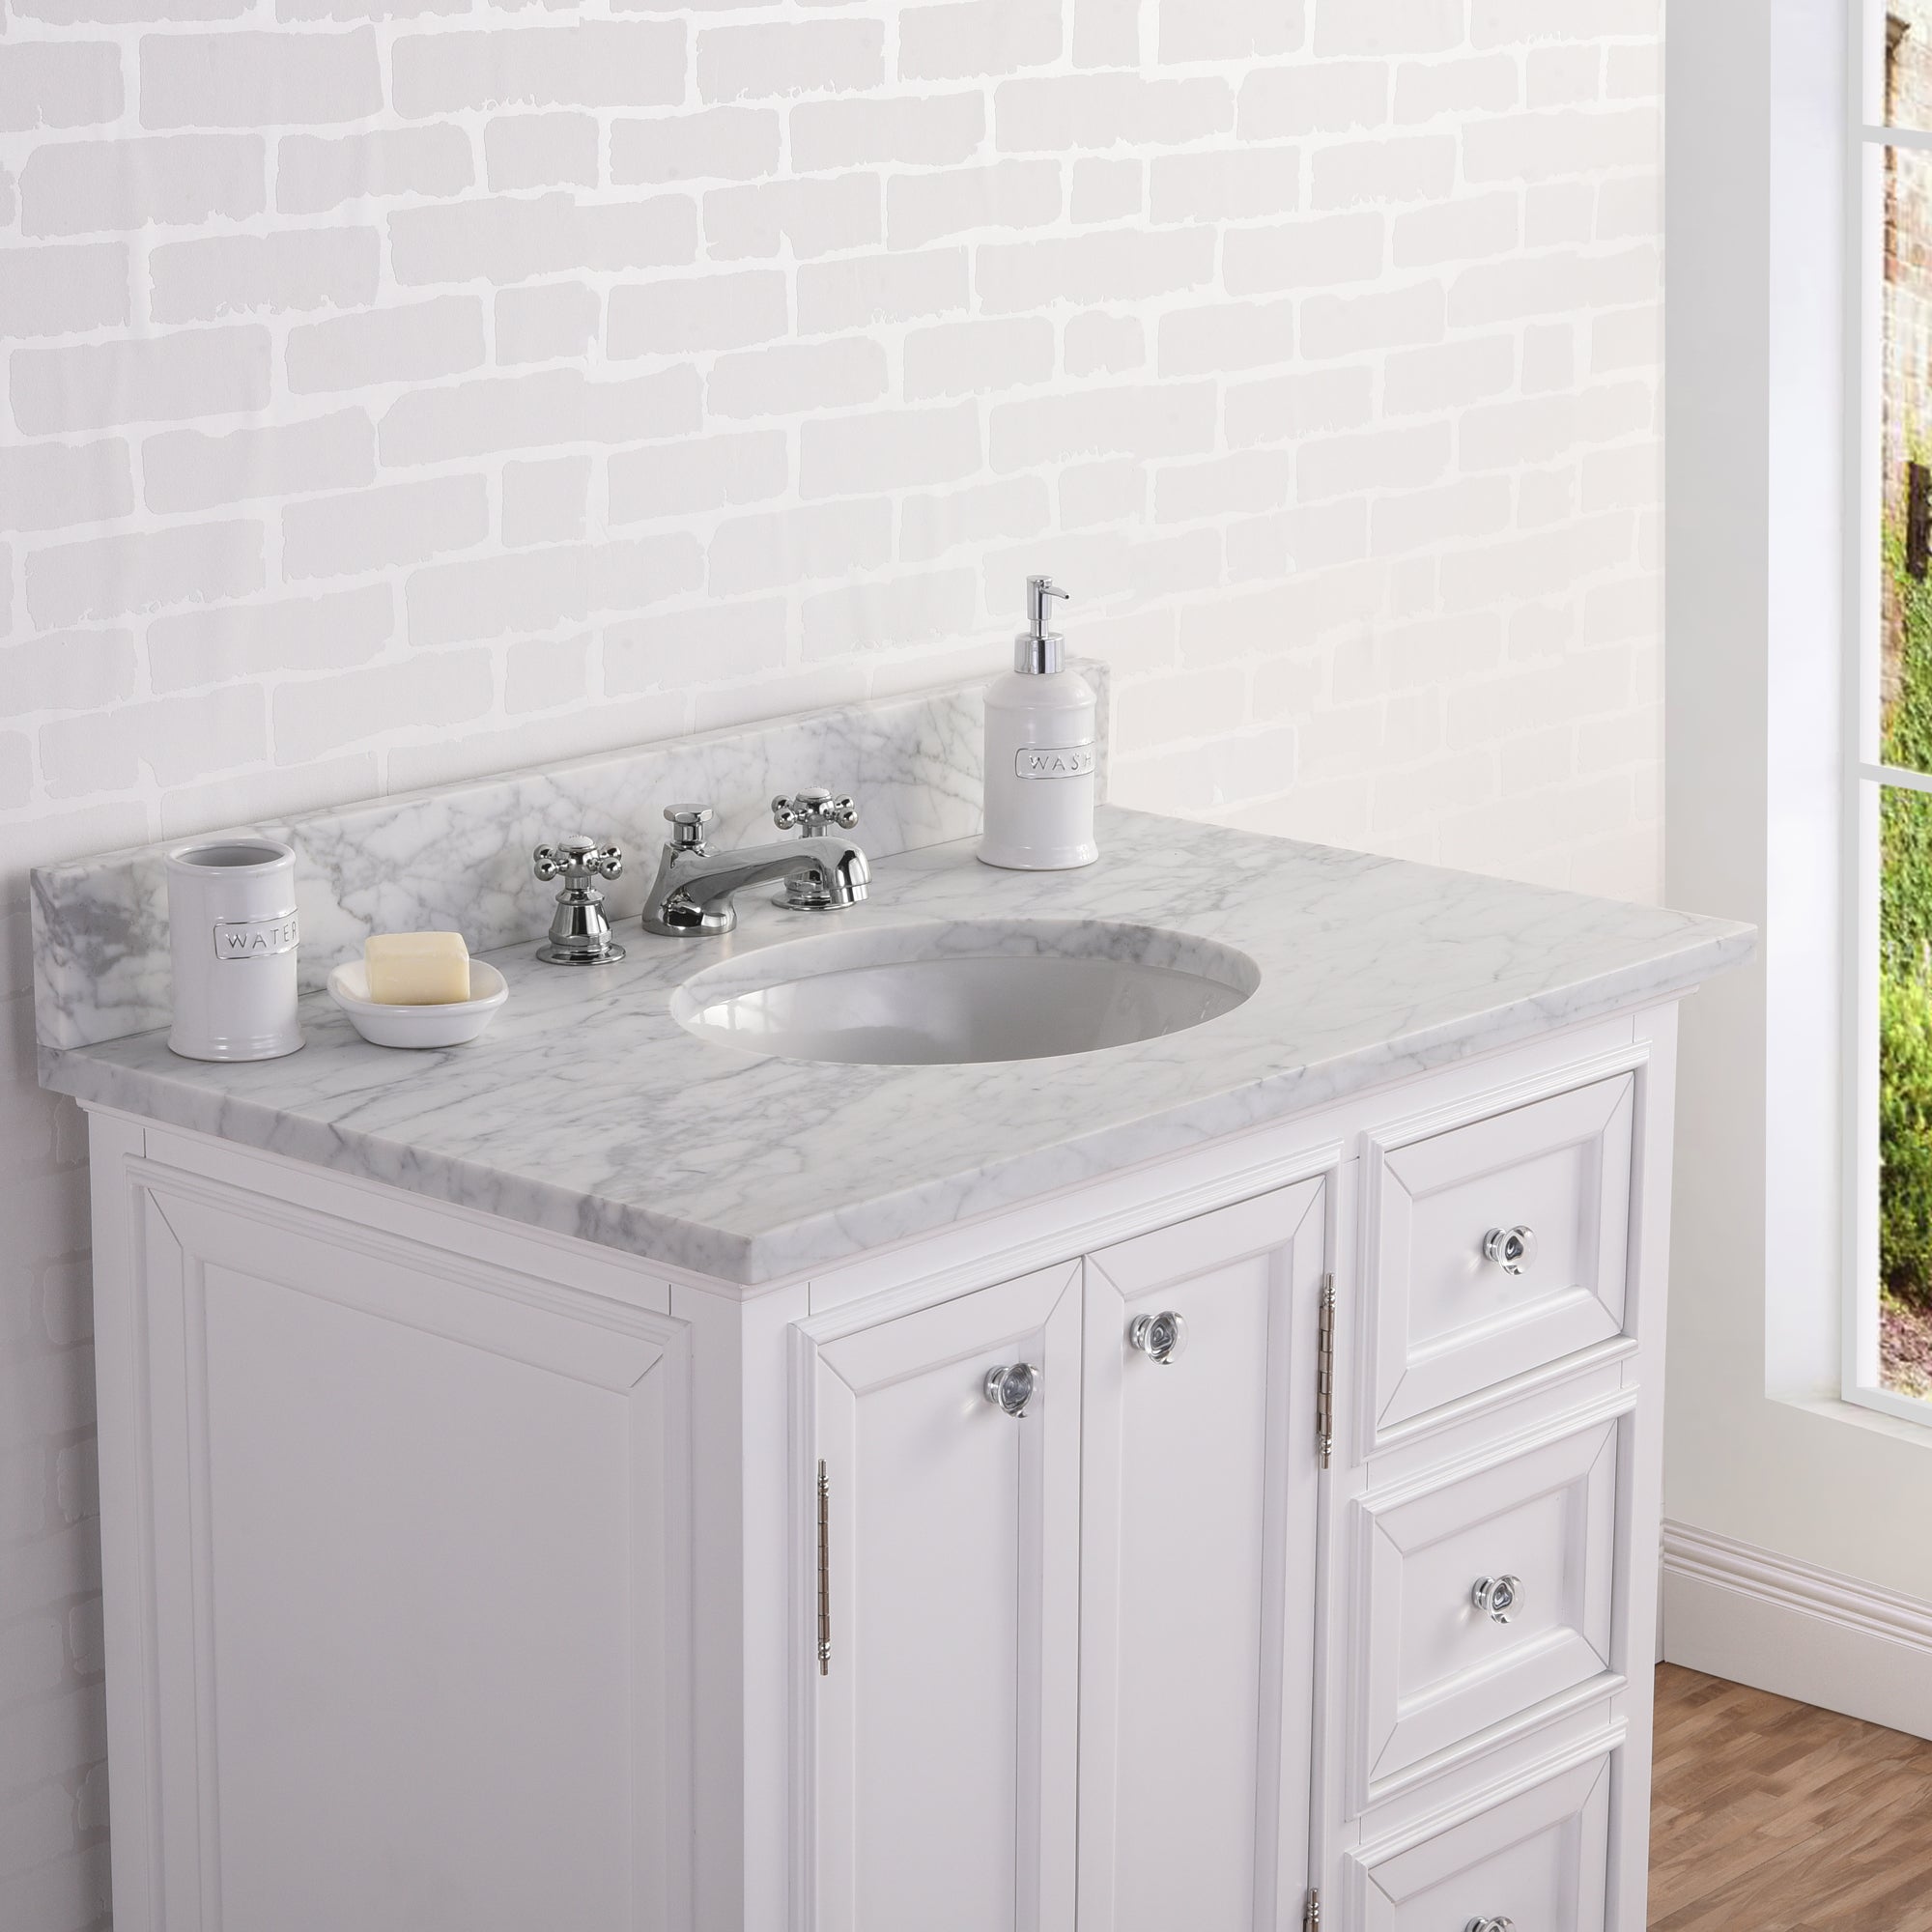 Water Creation | 36 Inch Wide Pure White Single Sink Carrara Marble Bathroom Vanity With Faucets From The Derby Collection | DE36CW01PW-000BX0901